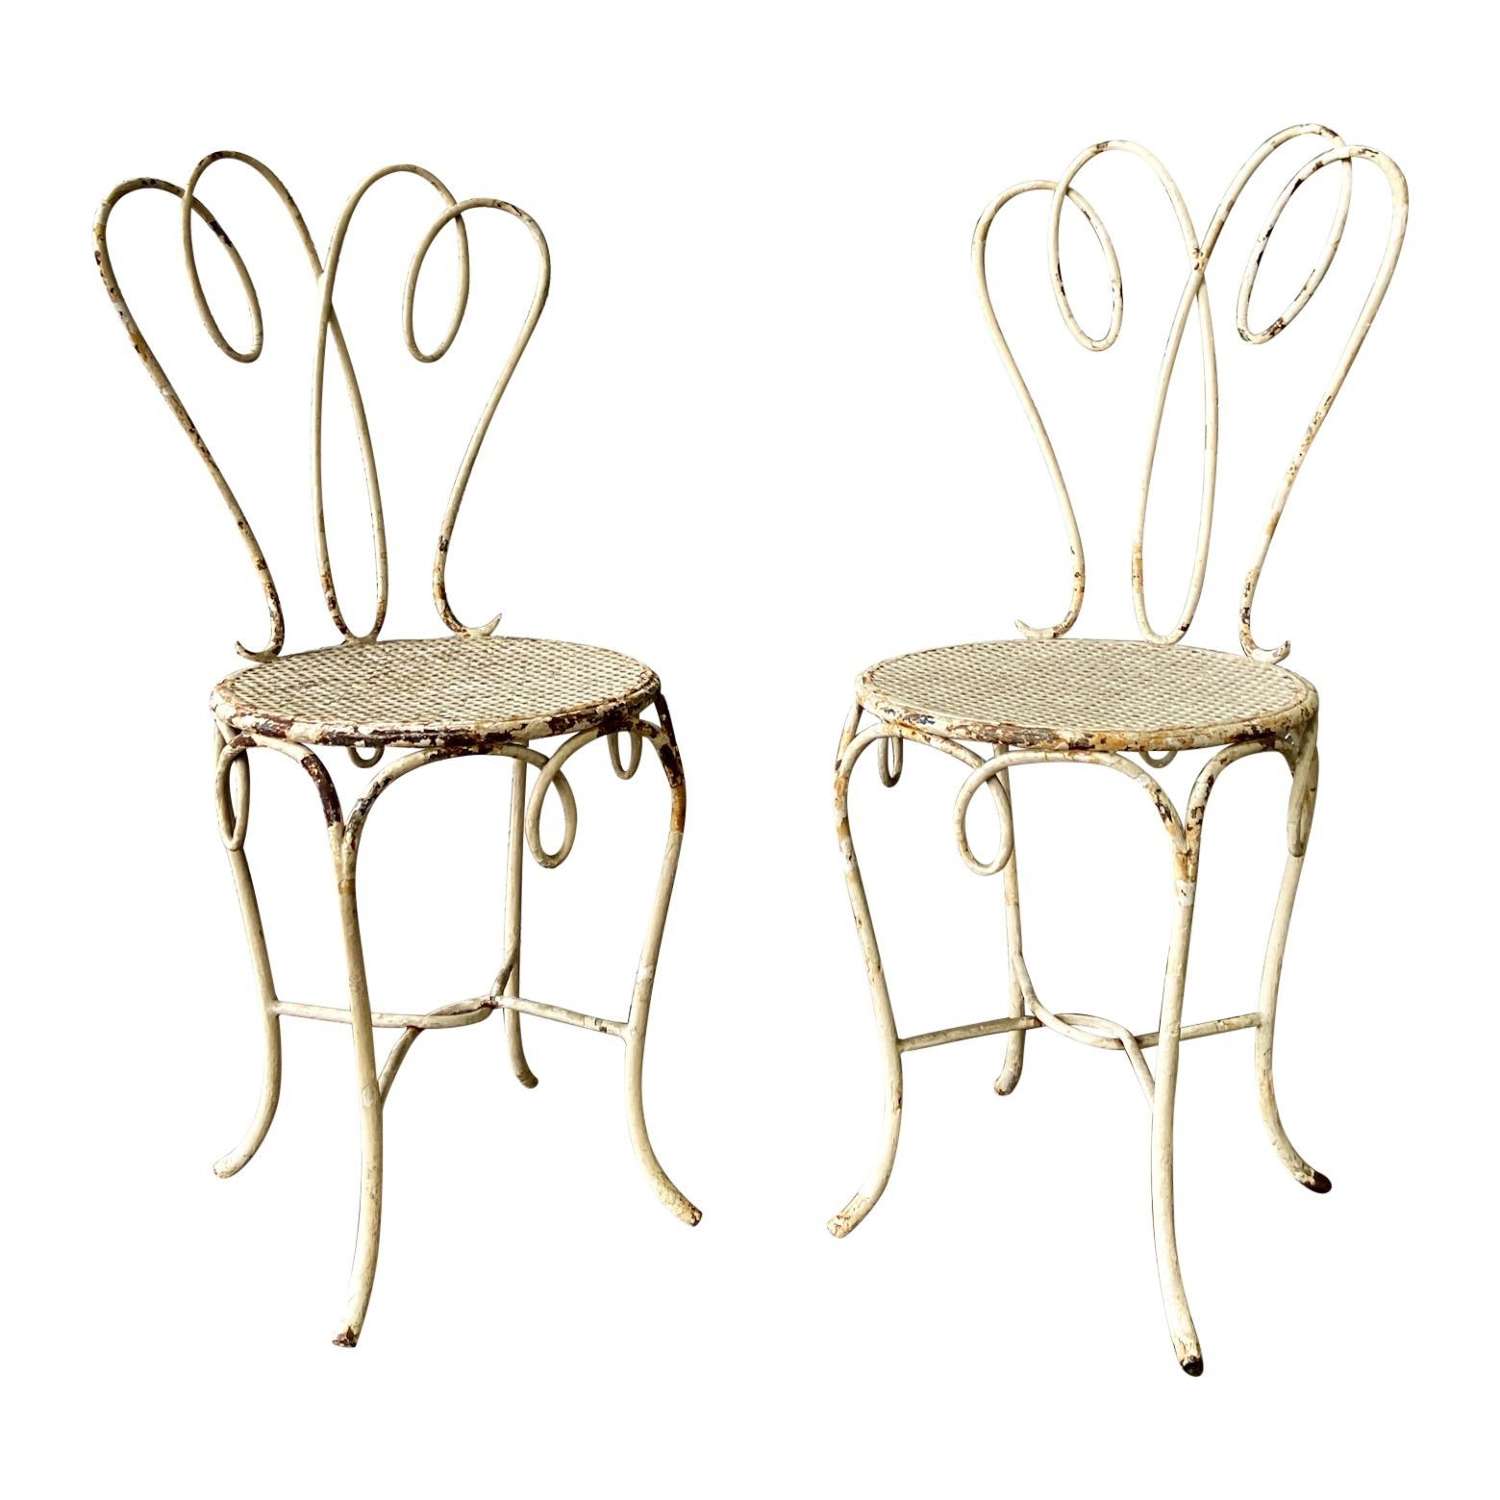 Pair, small 1950's painted iron garden side chairs, distressed white